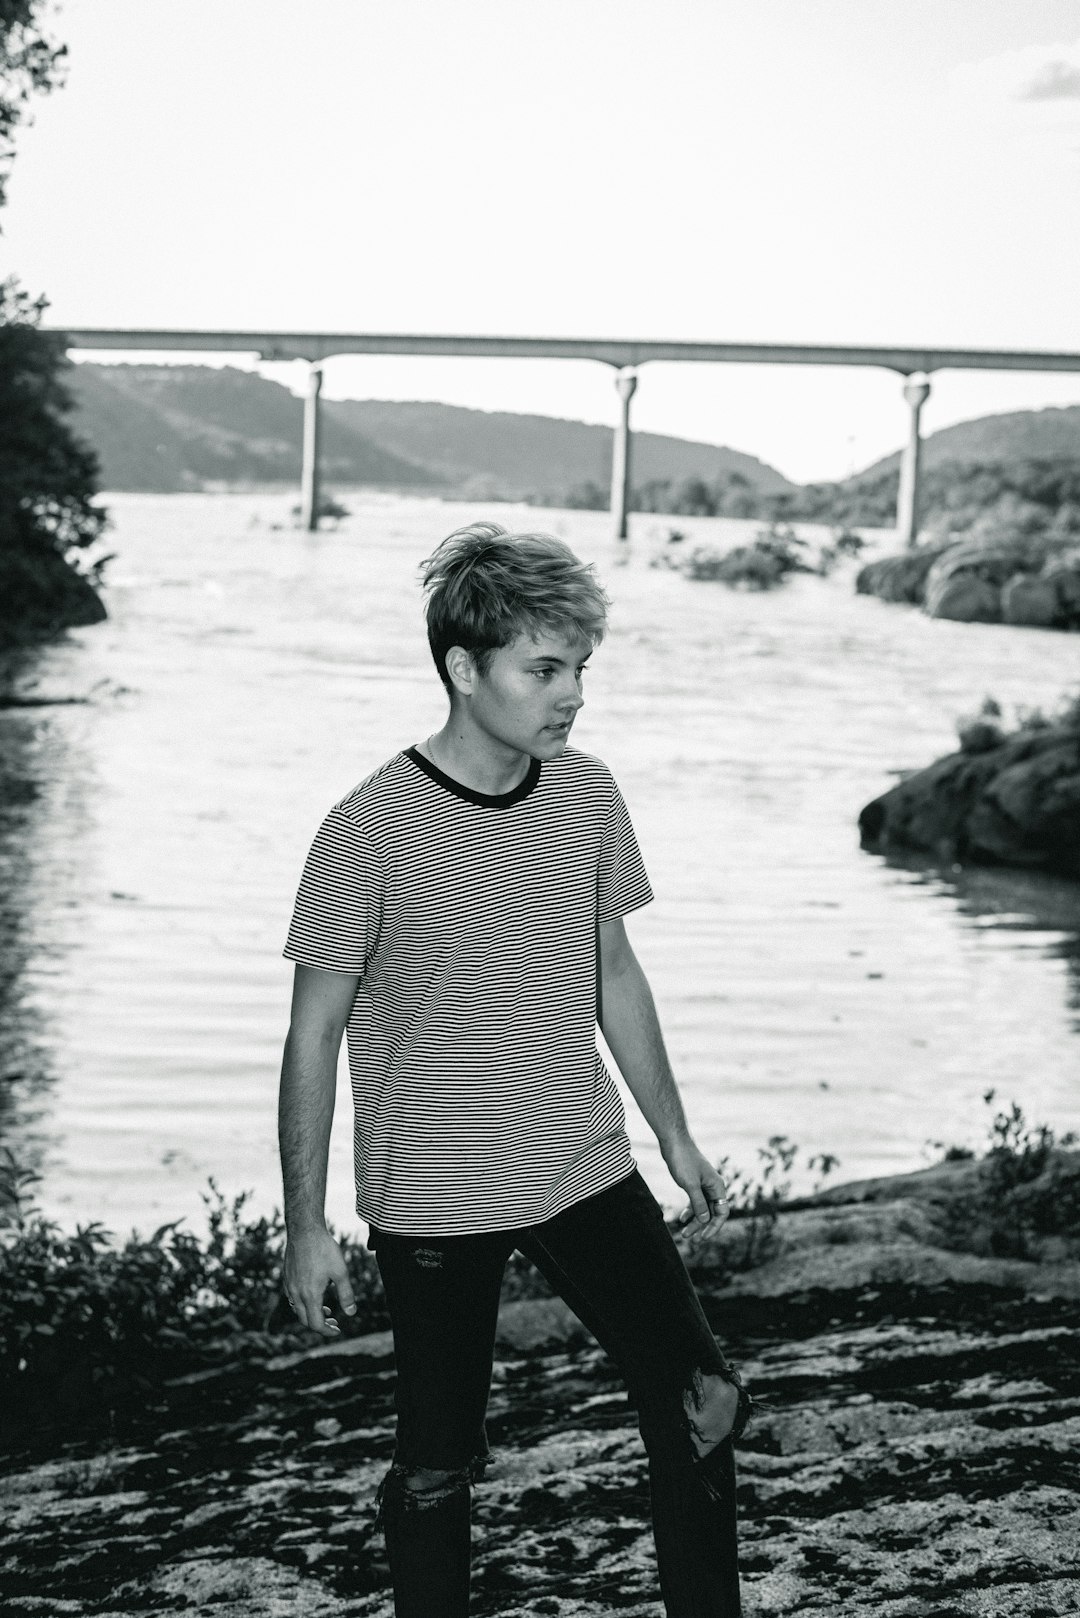 grayscale photo of man in striped shirt standing near body of water